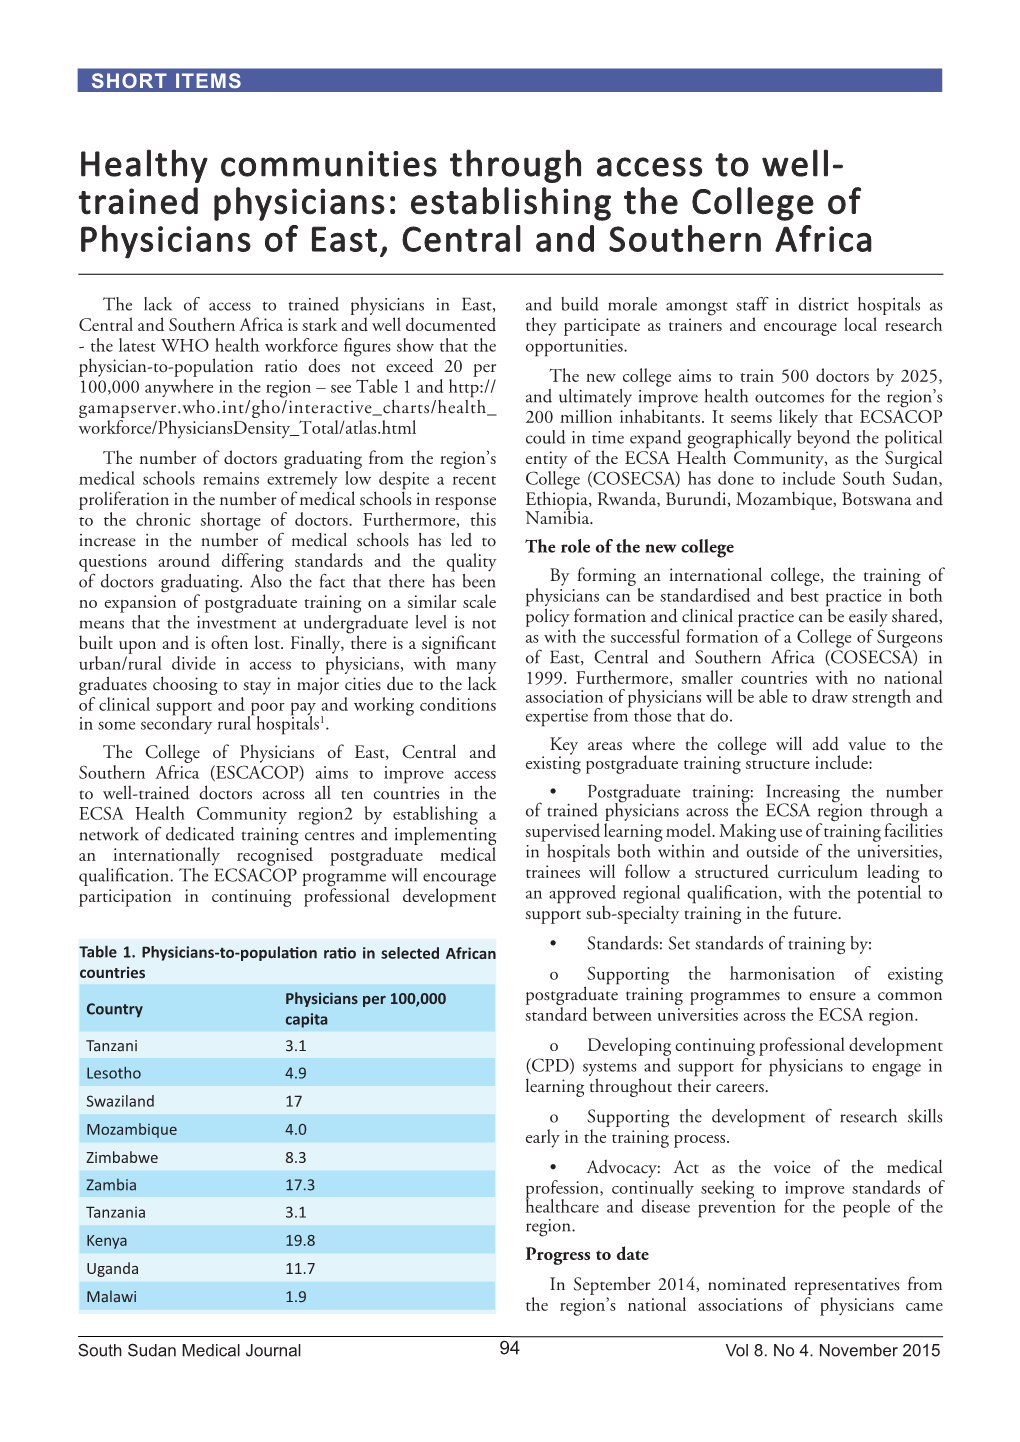 Trained Physicians: Establishing the College of Physicians of East, Central and Southern Africa